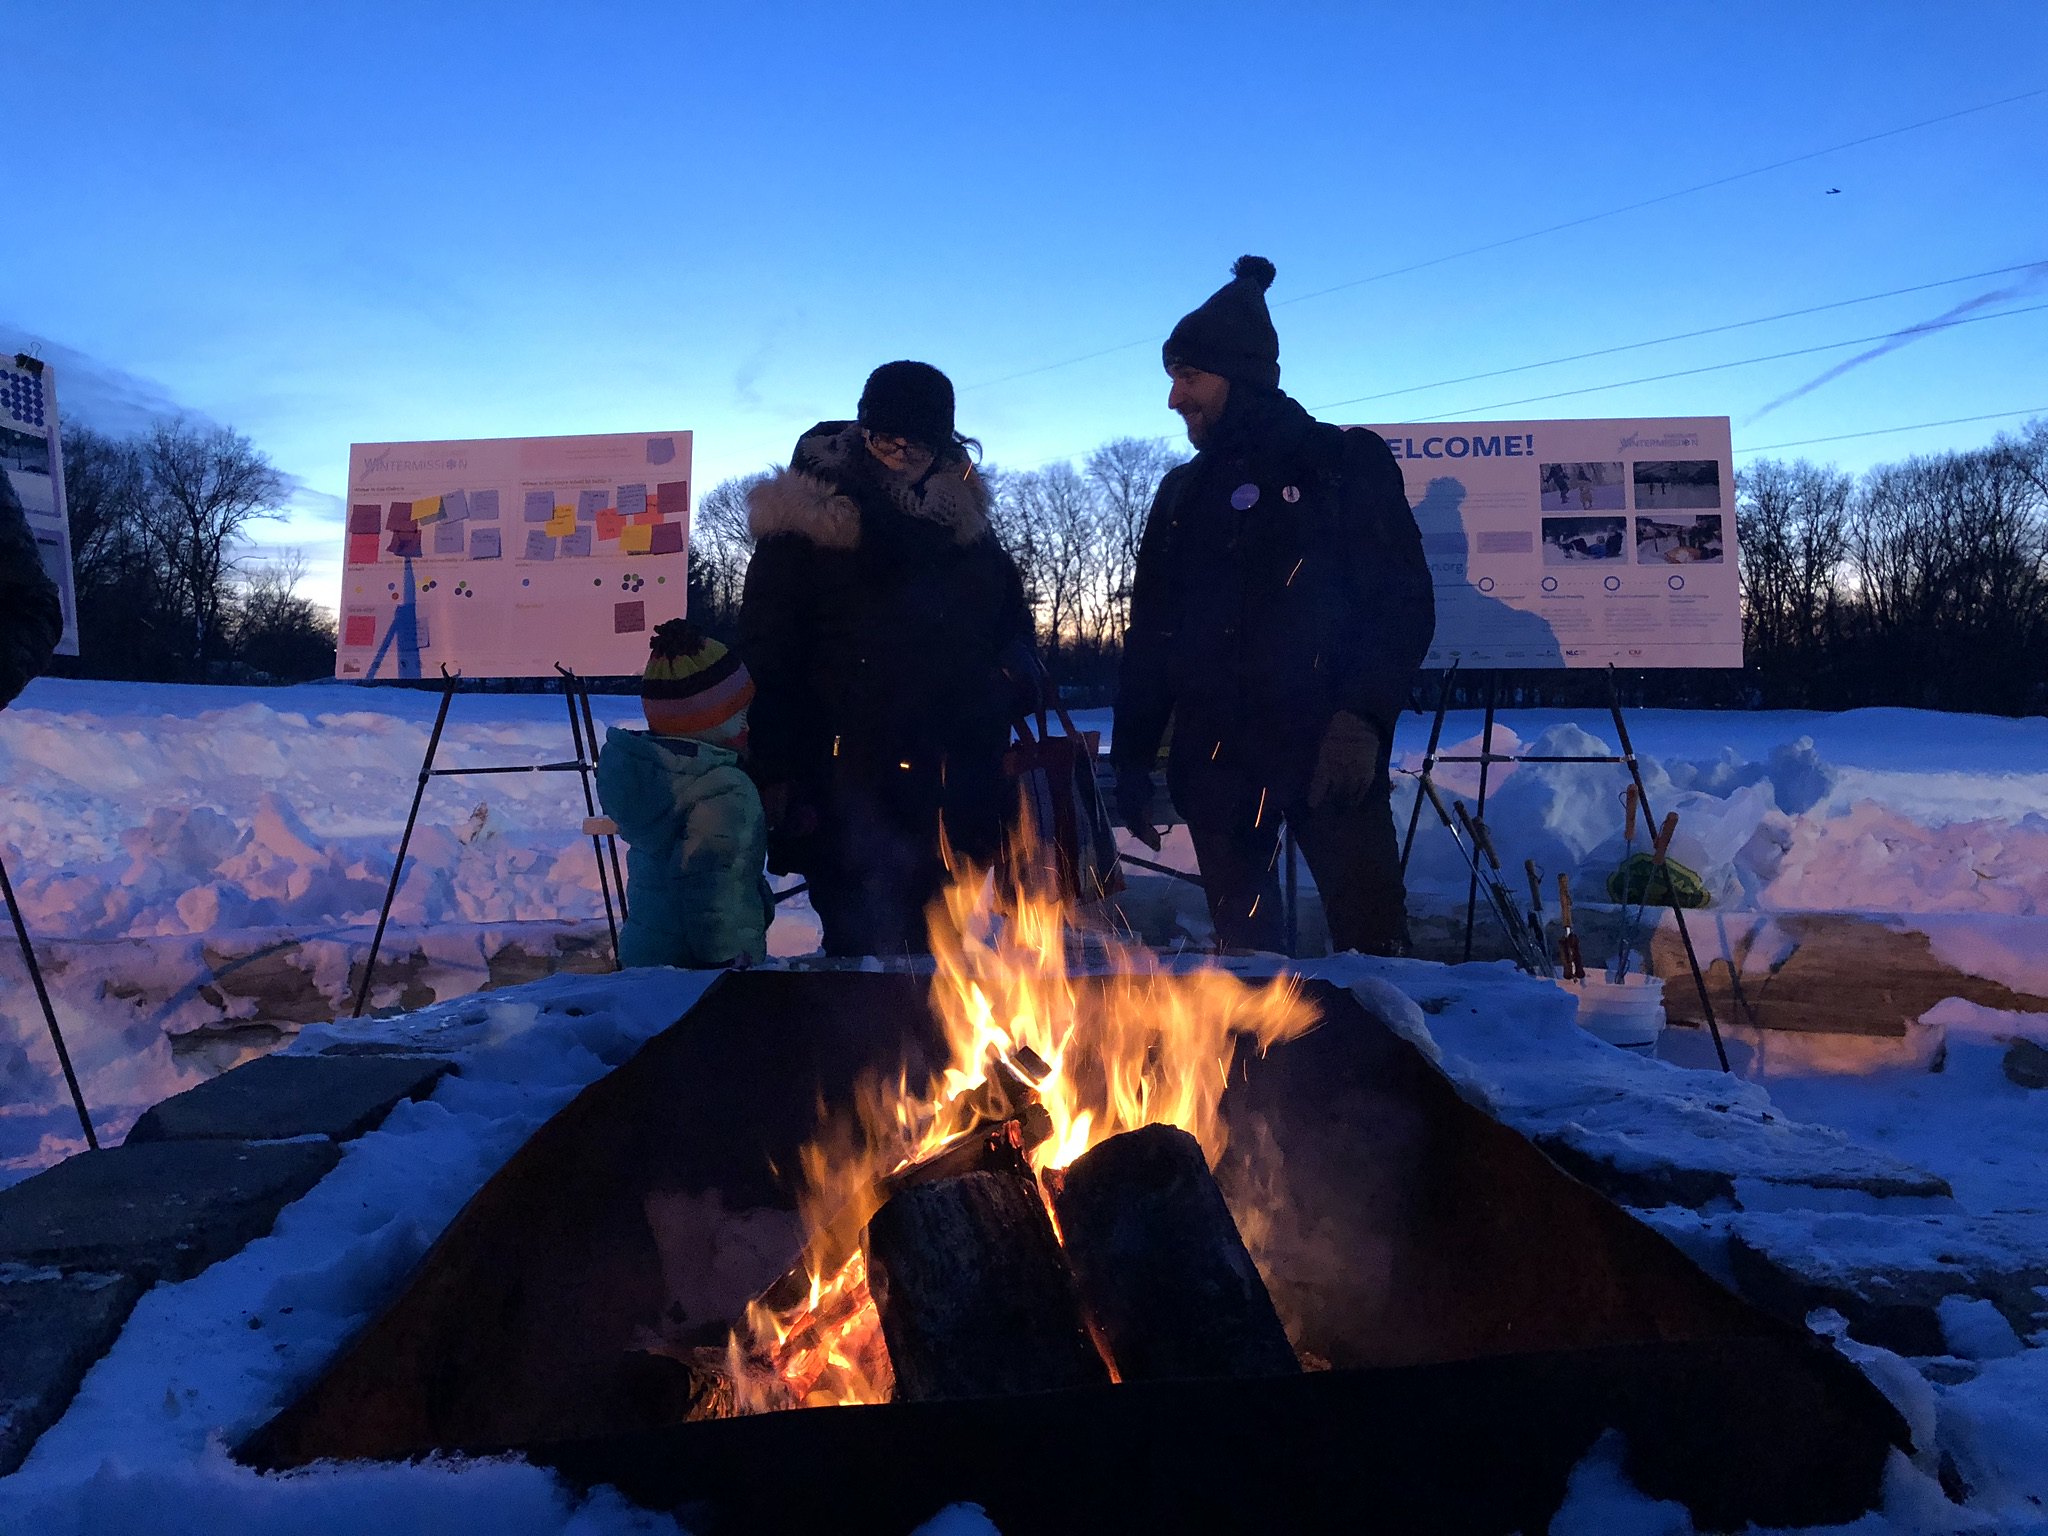 Two adults and a child enjoying an outdoor fire in a snowy location